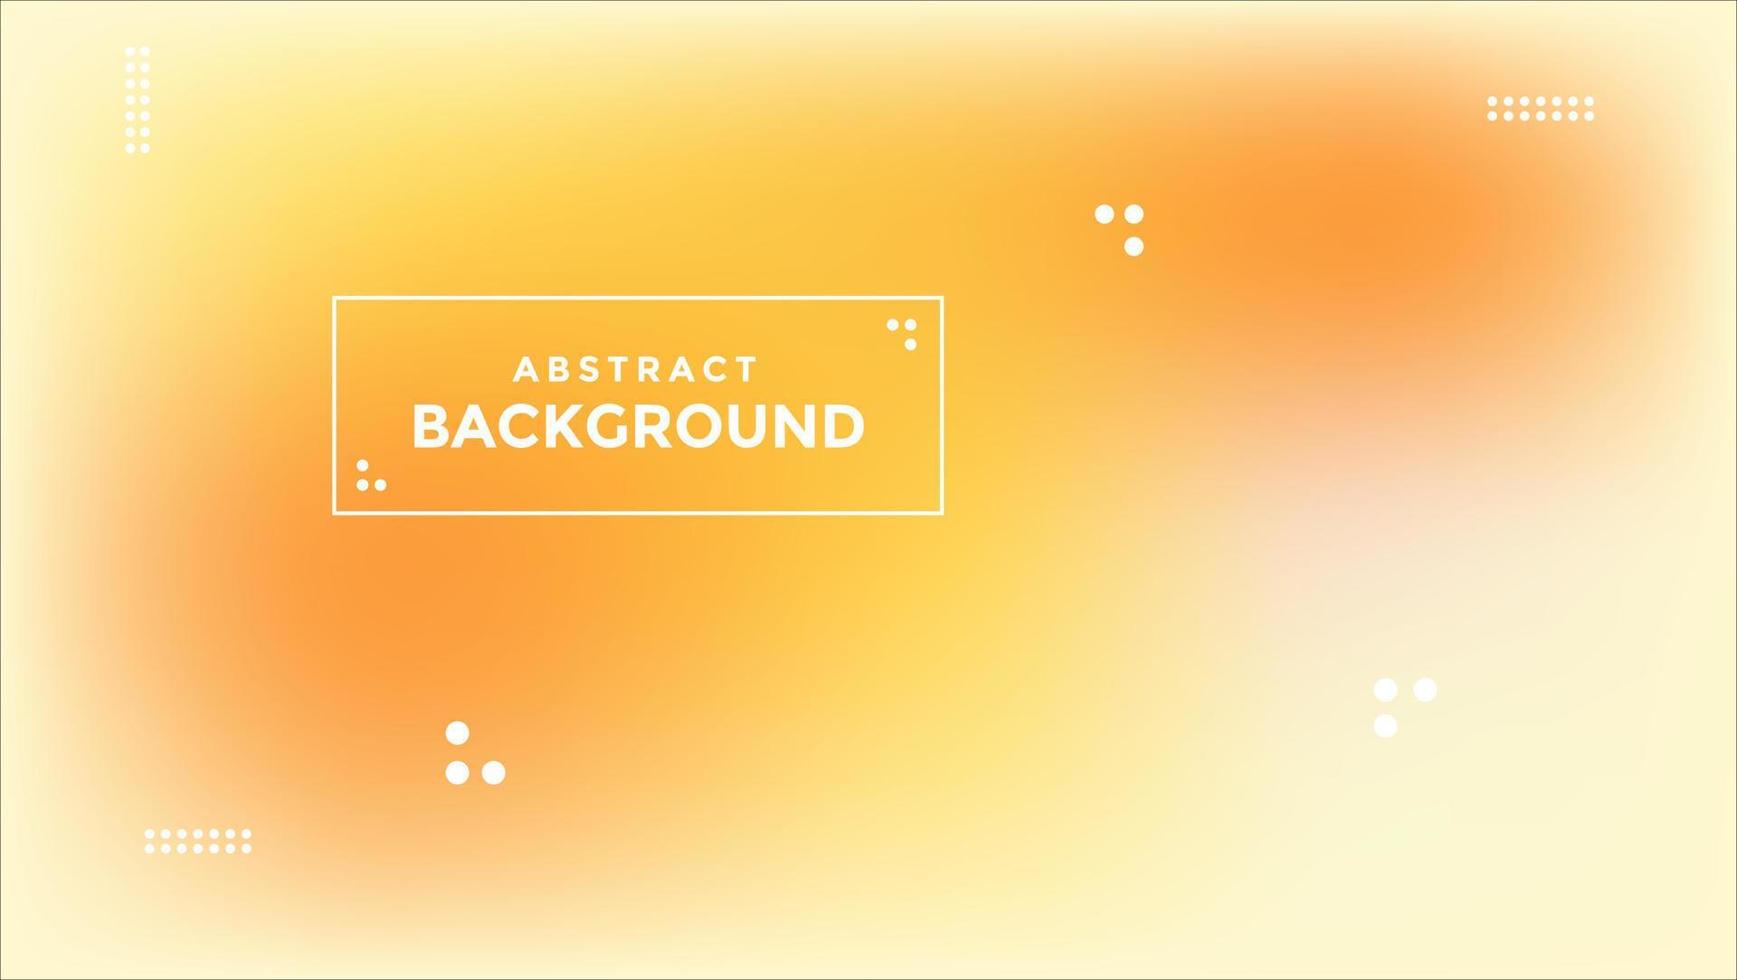 Abstract colored background template with orange and yellow gradient texture. vector